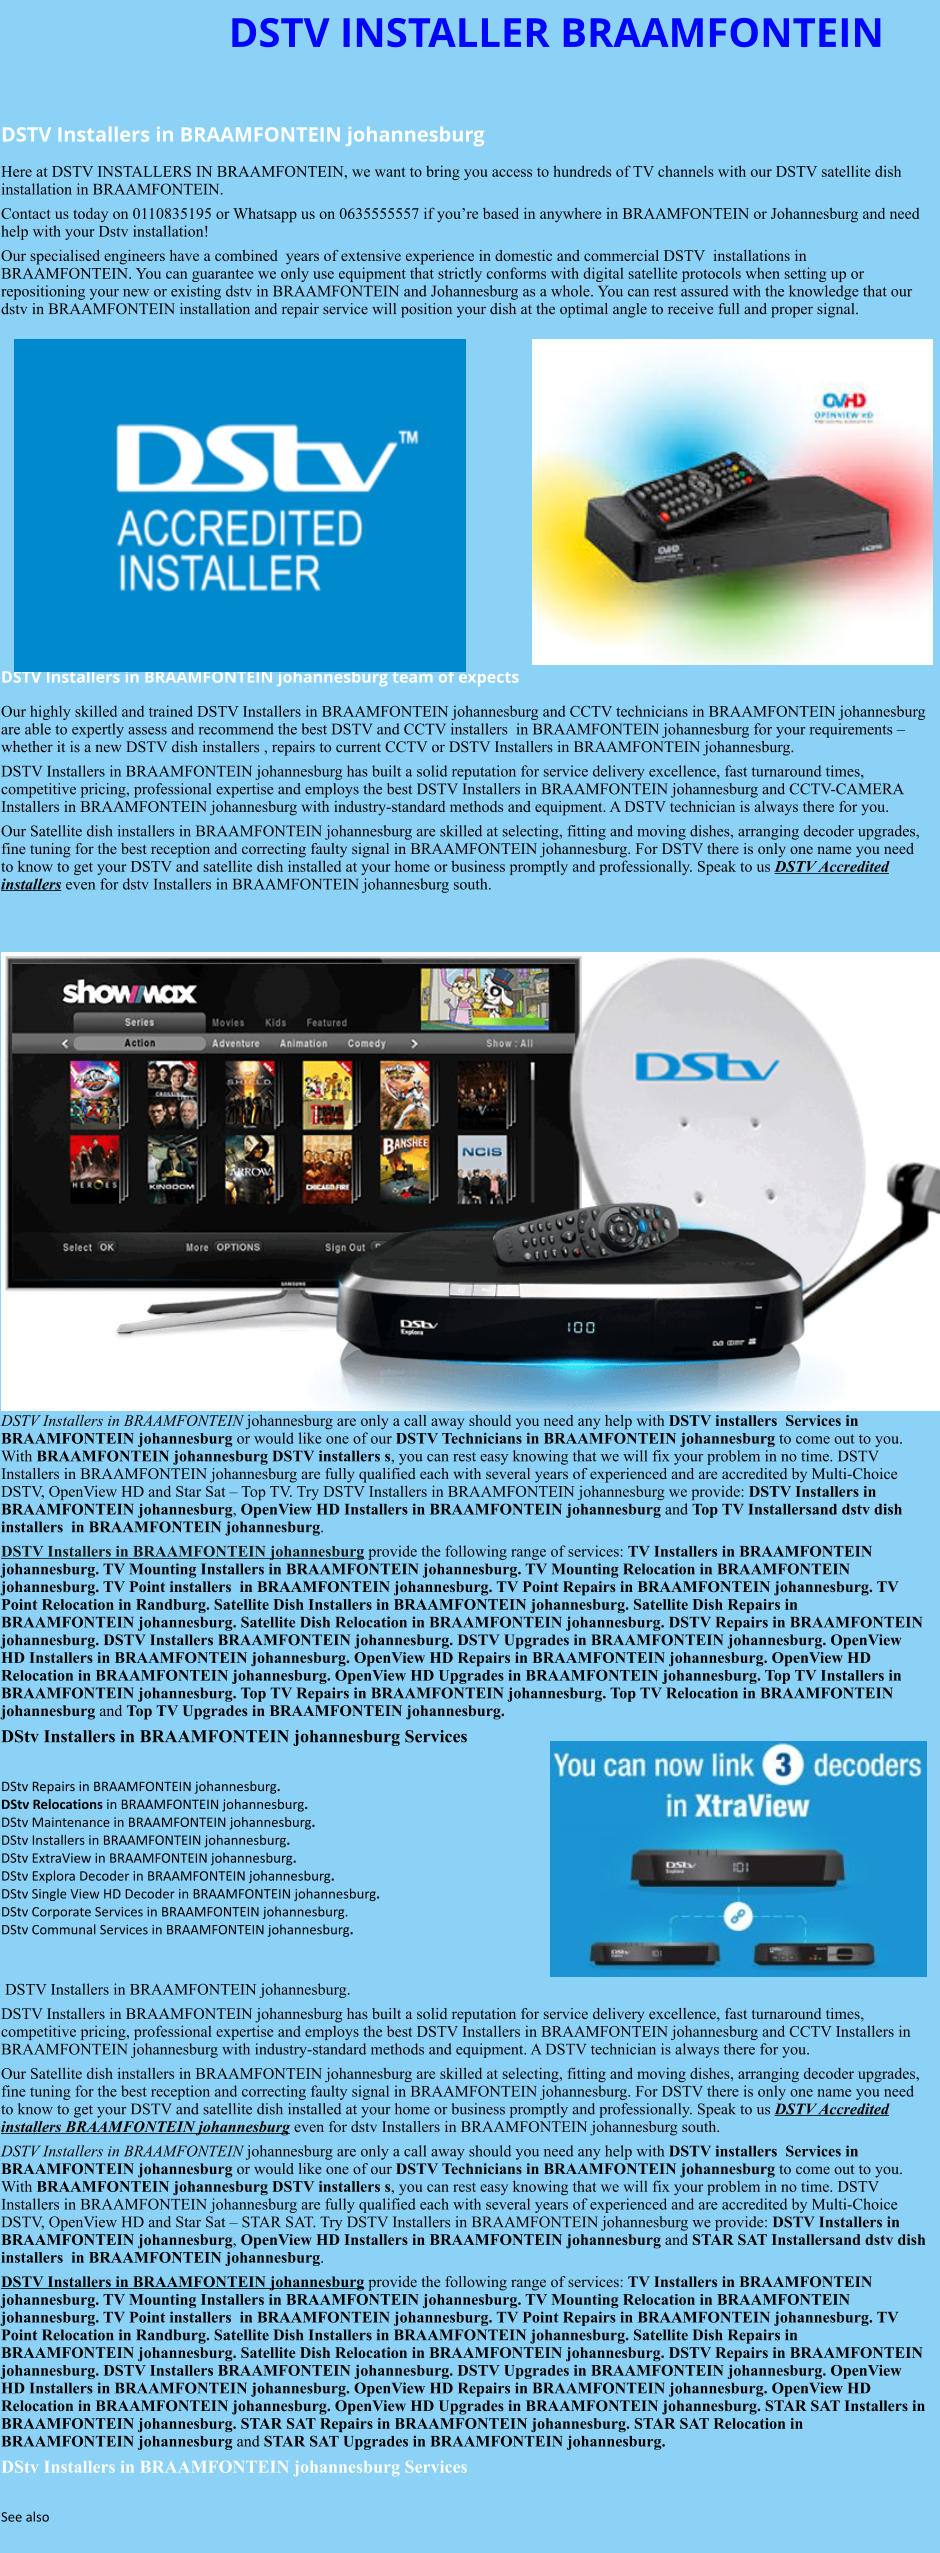 DSTV INSTALLER BRAAMFONTEIN  DSTV Installers in BRAAMFONTEIN johannesburg  Here at DSTV INSTALLERS IN BRAAMFONTEIN, we want to bring you access to hundreds of TV channels with our DSTV satellite dish installation in BRAAMFONTEIN. Contact us today on 0110835195 or Whatsapp us on 0635555557 if you’re based in anywhere in BRAAMFONTEIN or Johannesburg and need help with your Dstv installation! Our specialised engineers have a combined  years of extensive experience in domestic and commercial DSTV  installations in BRAAMFONTEIN. You can guarantee we only use equipment that strictly conforms with digital satellite protocols when setting up or repositioning your new or existing dstv in BRAAMFONTEIN and Johannesburg as a whole. You can rest assured with the knowledge that our dstv in BRAAMFONTEIN installation and repair service will position your dish at the optimal angle to receive full and proper signal.               DSTV Installers in BRAAMFONTEIN johannesburg team of expects Our highly skilled and trained DSTV Installers in BRAAMFONTEIN johannesburg and CCTV technicians in BRAAMFONTEIN johannesburg are able to expertly assess and recommend the best DSTV and CCTV installers  in BRAAMFONTEIN johannesburg for your requirements – whether it is a new DSTV dish installers , repairs to current CCTV or DSTV Installers in BRAAMFONTEIN johannesburg. DSTV Installers in BRAAMFONTEIN johannesburg has built a solid reputation for service delivery excellence, fast turnaround times, competitive pricing, professional expertise and employs the best DSTV Installers in BRAAMFONTEIN johannesburg and CCTV-CAMERA Installers in BRAAMFONTEIN johannesburg with industry-standard methods and equipment. A DSTV technician is always there for you. Our Satellite dish installers in BRAAMFONTEIN johannesburg are skilled at selecting, fitting and moving dishes, arranging decoder upgrades, fine tuning for the best reception and correcting faulty signal in BRAAMFONTEIN johannesburg. For DSTV there is only one name you need to know to get your DSTV and satellite dish installed at your home or business promptly and professionally. Speak to us DSTV Accredited installers even for dstv Installers in BRAAMFONTEIN johannesburg south.                      DSTV Installers in BRAAMFONTEIN johannesburg are only a call away should you need any help with DSTV installers  Services in BRAAMFONTEIN johannesburg or would like one of our DSTV Technicians in BRAAMFONTEIN johannesburg to come out to you. With BRAAMFONTEIN johannesburg DSTV installers s, you can rest easy knowing that we will fix your problem in no time. DSTV Installers in BRAAMFONTEIN johannesburg are fully qualified each with several years of experienced and are accredited by Multi-Choice DSTV, OpenView HD and Star Sat – Top TV. Try DSTV Installers in BRAAMFONTEIN johannesburg we provide: DSTV Installers in BRAAMFONTEIN johannesburg, OpenView HD Installers in BRAAMFONTEIN johannesburg and Top TV Installersand dstv dish installers  in BRAAMFONTEIN johannesburg. DSTV Installers in BRAAMFONTEIN johannesburg provide the following range of services: TV Installers in BRAAMFONTEIN johannesburg. TV Mounting Installers in BRAAMFONTEIN johannesburg. TV Mounting Relocation in BRAAMFONTEIN johannesburg. TV Point installers  in BRAAMFONTEIN johannesburg. TV Point Repairs in BRAAMFONTEIN johannesburg. TV Point Relocation in Randburg. Satellite Dish Installers in BRAAMFONTEIN johannesburg. Satellite Dish Repairs in BRAAMFONTEIN johannesburg. Satellite Dish Relocation in BRAAMFONTEIN johannesburg. DSTV Repairs in BRAAMFONTEIN johannesburg. DSTV Installers BRAAMFONTEIN johannesburg. DSTV Upgrades in BRAAMFONTEIN johannesburg. OpenView HD Installers in BRAAMFONTEIN johannesburg. OpenView HD Repairs in BRAAMFONTEIN johannesburg. OpenView HD Relocation in BRAAMFONTEIN johannesburg. OpenView HD Upgrades in BRAAMFONTEIN johannesburg. Top TV Installers in BRAAMFONTEIN johannesburg. Top TV Repairs in BRAAMFONTEIN johannesburg. Top TV Relocation in BRAAMFONTEIN johannesburg and Top TV Upgrades in BRAAMFONTEIN johannesburg. DStv Installers in BRAAMFONTEIN johannesburg Services  DStv Repairs in BRAAMFONTEIN johannesburg.  DStv Relocations in BRAAMFONTEIN johannesburg.  DStv Maintenance in BRAAMFONTEIN johannesburg. DStv Installers in BRAAMFONTEIN johannesburg. DStv ExtraView in BRAAMFONTEIN johannesburg. DStv Explora Decoder in BRAAMFONTEIN johannesburg. DStv Single View HD Decoder in BRAAMFONTEIN johannesburg. DStv Corporate Services in BRAAMFONTEIN johannesburg. DStv Communal Services in BRAAMFONTEIN johannesburg.    DSTV Installers in BRAAMFONTEIN johannesburg. DSTV Installers in BRAAMFONTEIN johannesburg has built a solid reputation for service delivery excellence, fast turnaround times, competitive pricing, professional expertise and employs the best DSTV Installers in BRAAMFONTEIN johannesburg and CCTV Installers in BRAAMFONTEIN johannesburg with industry-standard methods and equipment. A DSTV technician is always there for you. Our Satellite dish installers in BRAAMFONTEIN johannesburg are skilled at selecting, fitting and moving dishes, arranging decoder upgrades, fine tuning for the best reception and correcting faulty signal in BRAAMFONTEIN johannesburg. For DSTV there is only one name you need to know to get your DSTV and satellite dish installed at your home or business promptly and professionally. Speak to us DSTV Accredited installers BRAAMFONTEIN johannesburg even for dstv Installers in BRAAMFONTEIN johannesburg south. DSTV Installers in BRAAMFONTEIN johannesburg are only a call away should you need any help with DSTV installers  Services in BRAAMFONTEIN johannesburg or would like one of our DSTV Technicians in BRAAMFONTEIN johannesburg to come out to you. With BRAAMFONTEIN johannesburg DSTV installers s, you can rest easy knowing that we will fix your problem in no time. DSTV Installers in BRAAMFONTEIN johannesburg are fully qualified each with several years of experienced and are accredited by Multi-Choice DSTV, OpenView HD and Star Sat – STAR SAT. Try DSTV Installers in BRAAMFONTEIN johannesburg we provide: DSTV Installers in BRAAMFONTEIN johannesburg, OpenView HD Installers in BRAAMFONTEIN johannesburg and STAR SAT Installersand dstv dish installers  in BRAAMFONTEIN johannesburg. DSTV Installers in BRAAMFONTEIN johannesburg provide the following range of services: TV Installers in BRAAMFONTEIN johannesburg. TV Mounting Installers in BRAAMFONTEIN johannesburg. TV Mounting Relocation in BRAAMFONTEIN johannesburg. TV Point installers  in BRAAMFONTEIN johannesburg. TV Point Repairs in BRAAMFONTEIN johannesburg. TV Point Relocation in Randburg. Satellite Dish Installers in BRAAMFONTEIN johannesburg. Satellite Dish Repairs in BRAAMFONTEIN johannesburg. Satellite Dish Relocation in BRAAMFONTEIN johannesburg. DSTV Repairs in BRAAMFONTEIN johannesburg. DSTV Installers BRAAMFONTEIN johannesburg. DSTV Upgrades in BRAAMFONTEIN johannesburg. OpenView HD Installers in BRAAMFONTEIN johannesburg. OpenView HD Repairs in BRAAMFONTEIN johannesburg. OpenView HD Relocation in BRAAMFONTEIN johannesburg. OpenView HD Upgrades in BRAAMFONTEIN johannesburg. STAR SAT Installers in BRAAMFONTEIN johannesburg. STAR SAT Repairs in BRAAMFONTEIN johannesburg. STAR SAT Relocation in BRAAMFONTEIN johannesburg and STAR SAT Upgrades in BRAAMFONTEIN johannesburg. DStv Installers in BRAAMFONTEIN johannesburg Services  See also